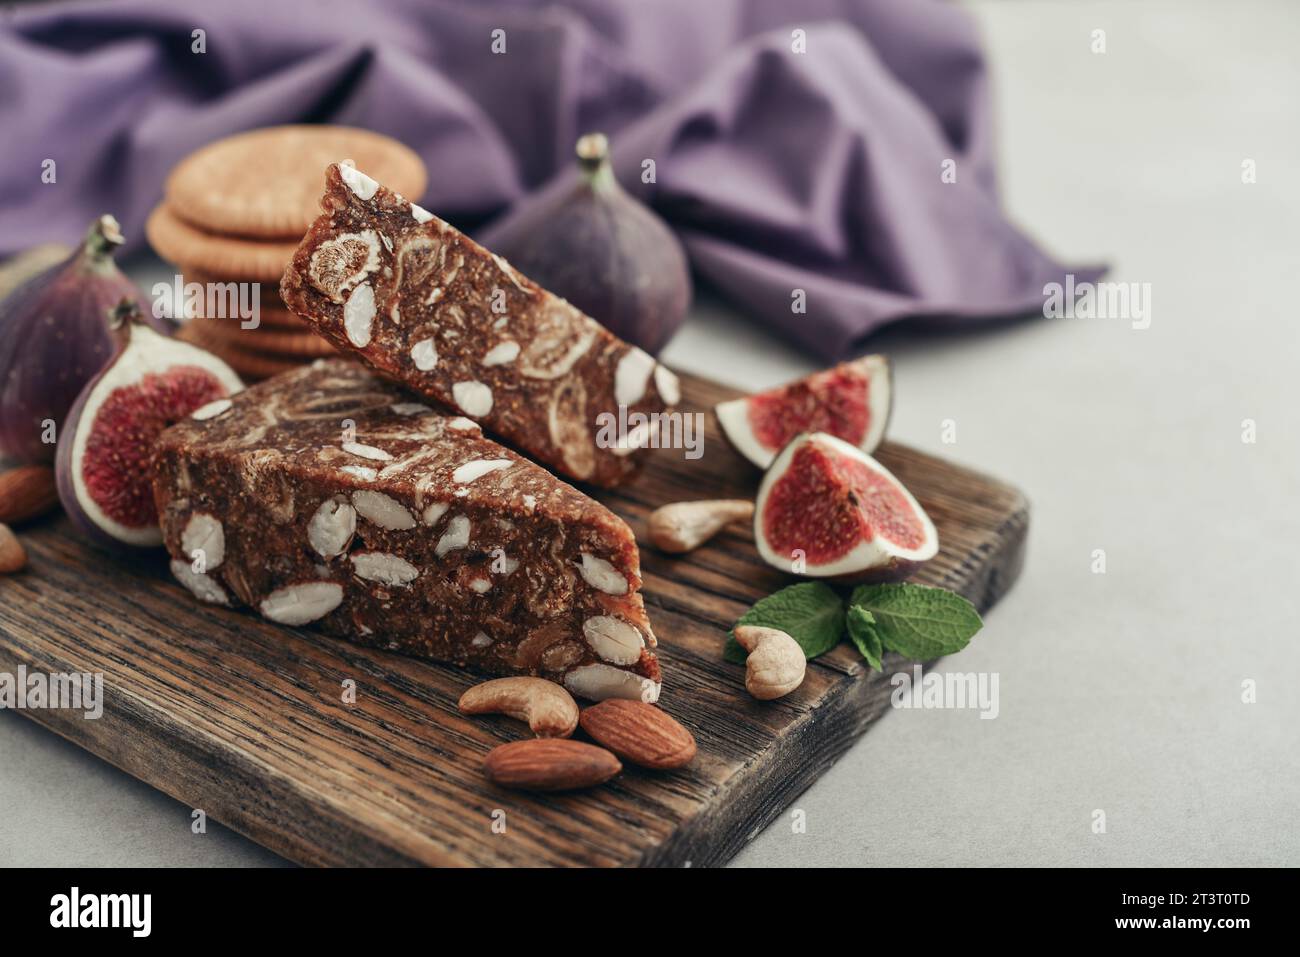 Pan de Higo - Spanish fig bread at wooden cutting board with fresh figs and almond closeup Stock Photo